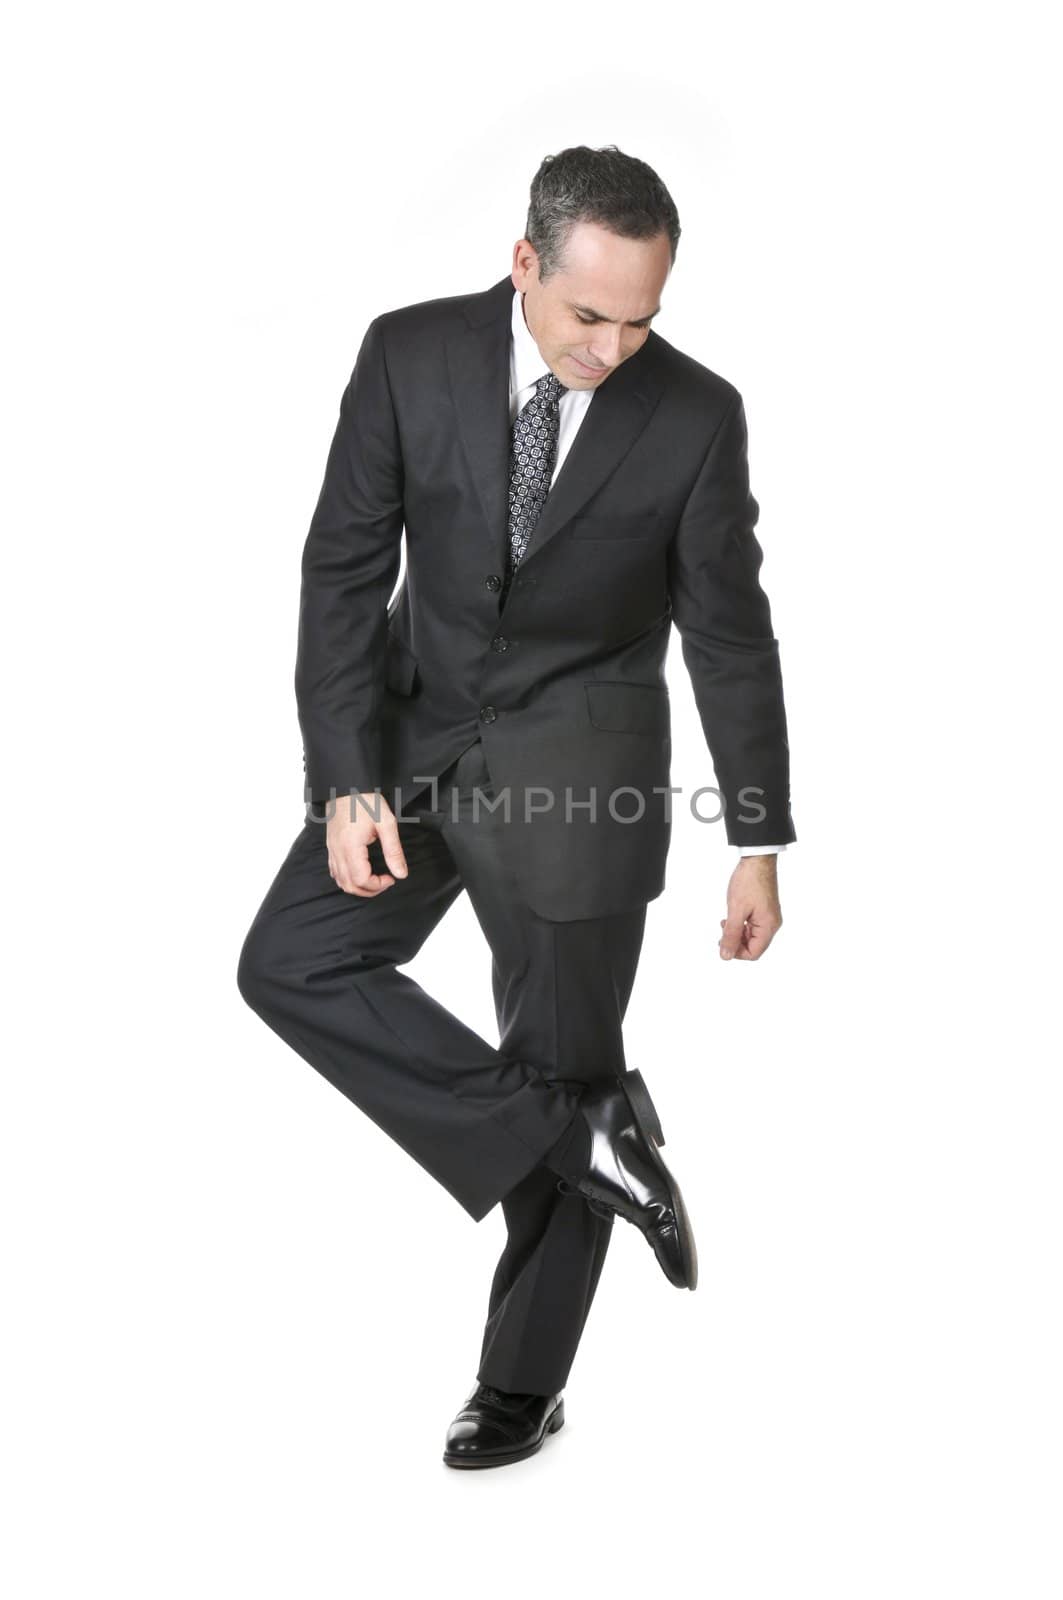 Businessman in a suit looking at his shoe isolated on white background